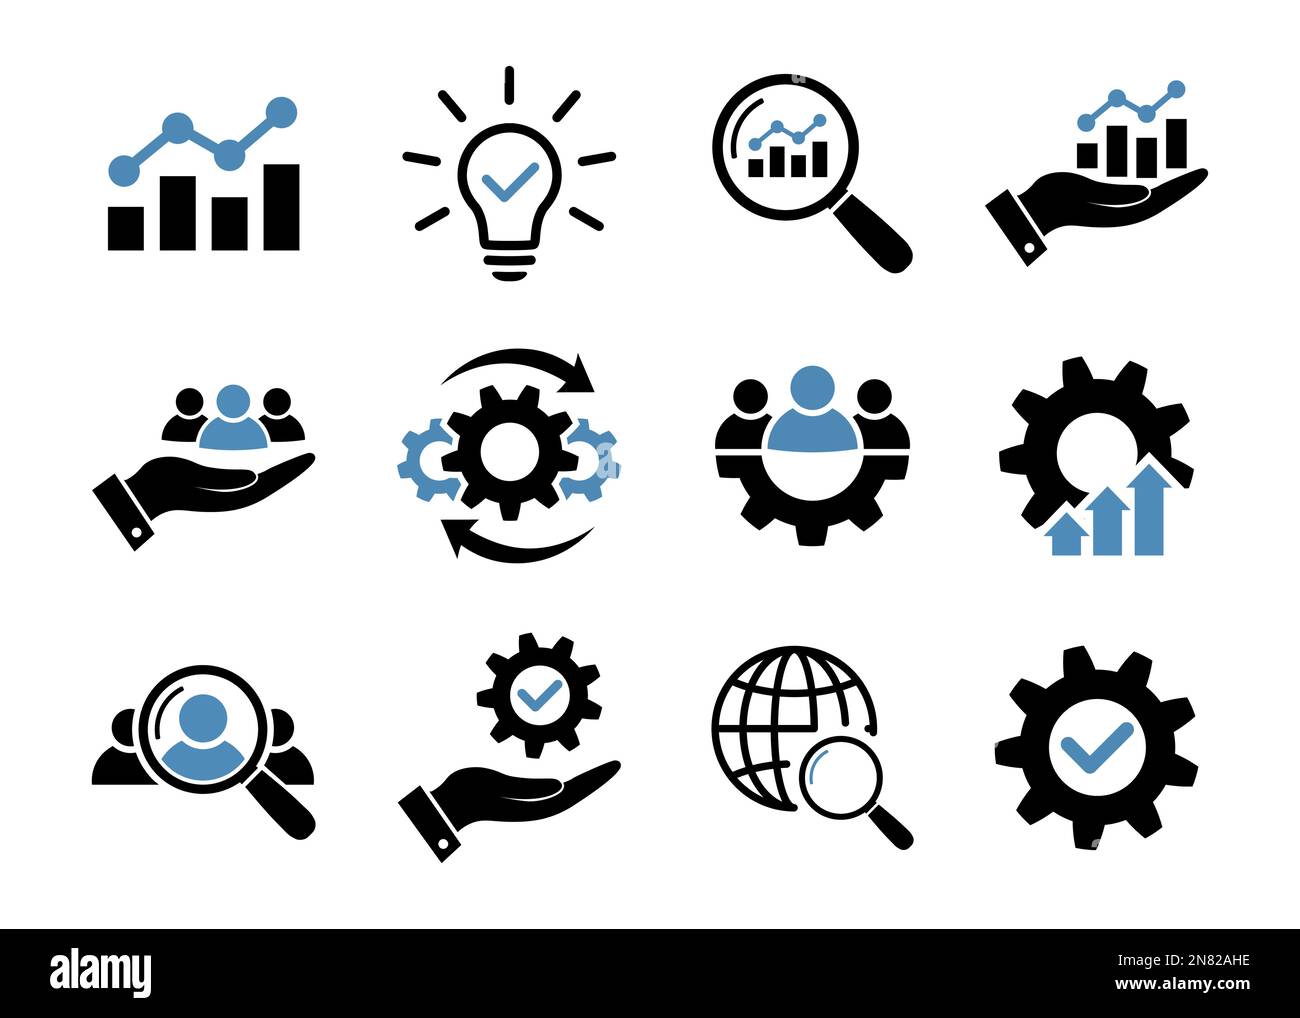 Business icon set in flat. Black and blue symbols Stock Vector